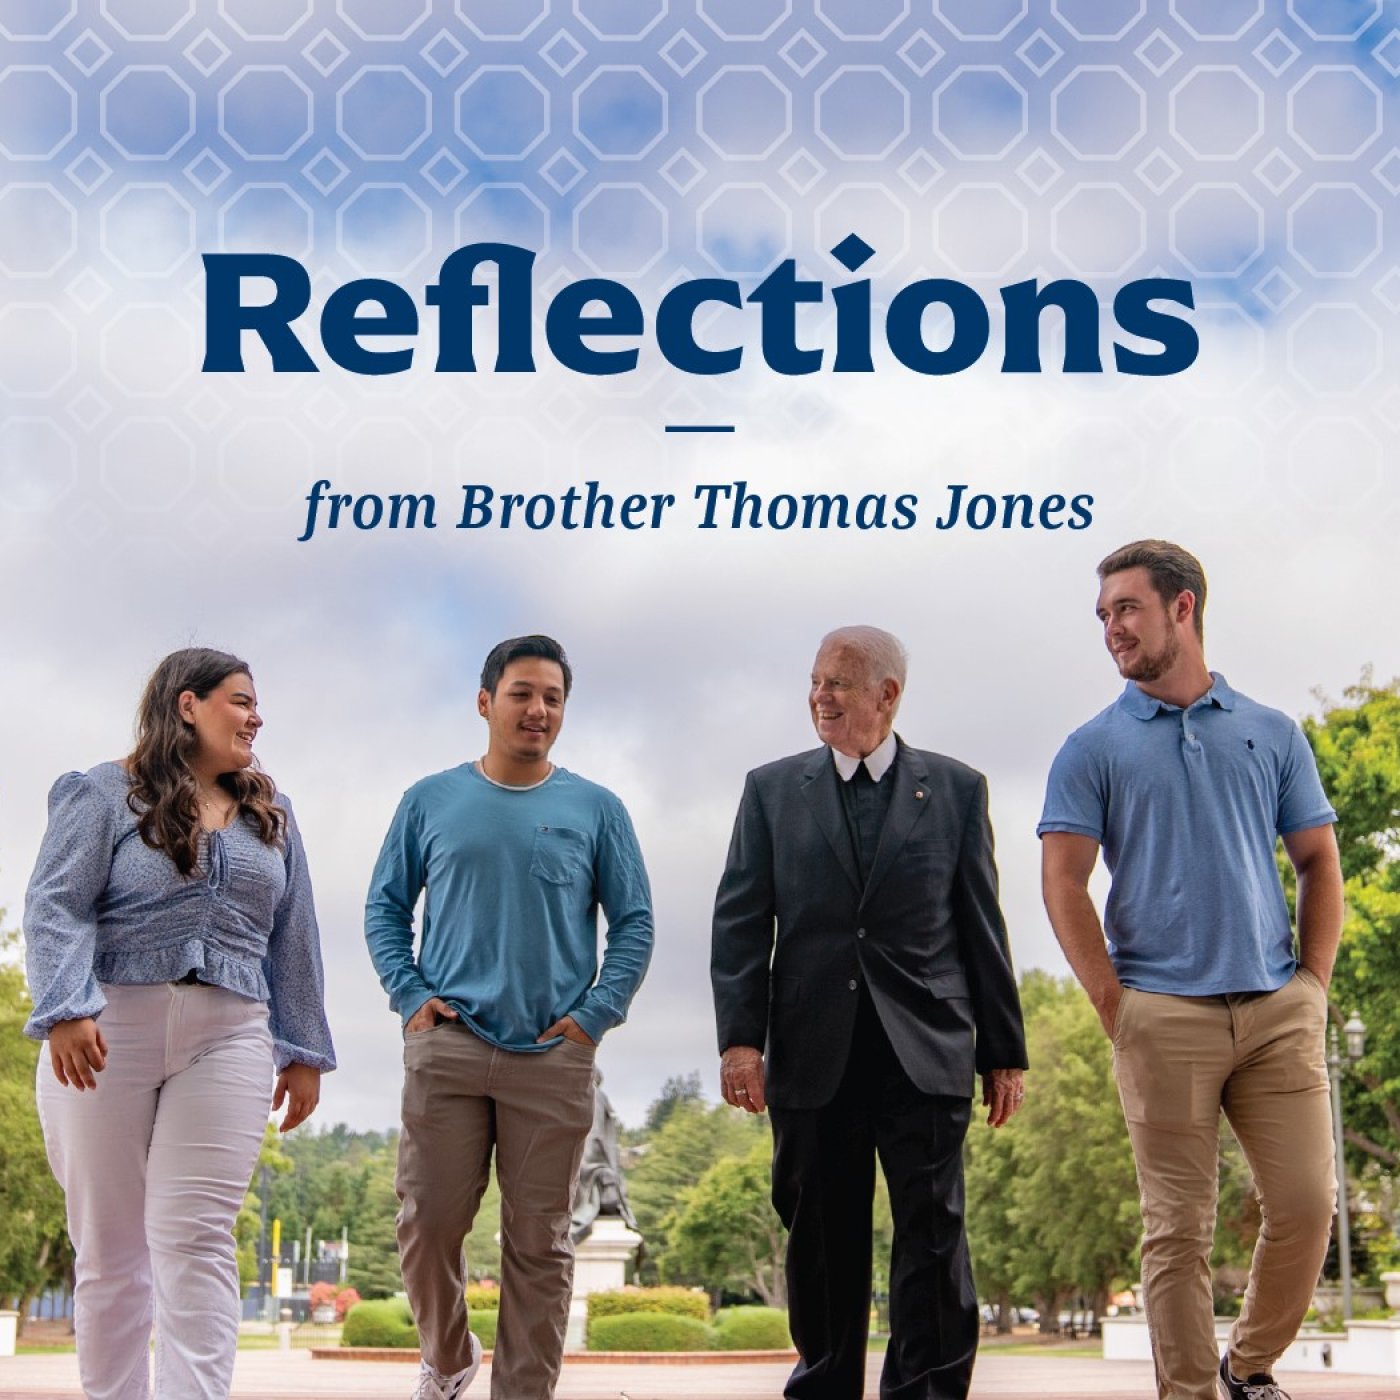 Reflections from Brother Thomas Jones